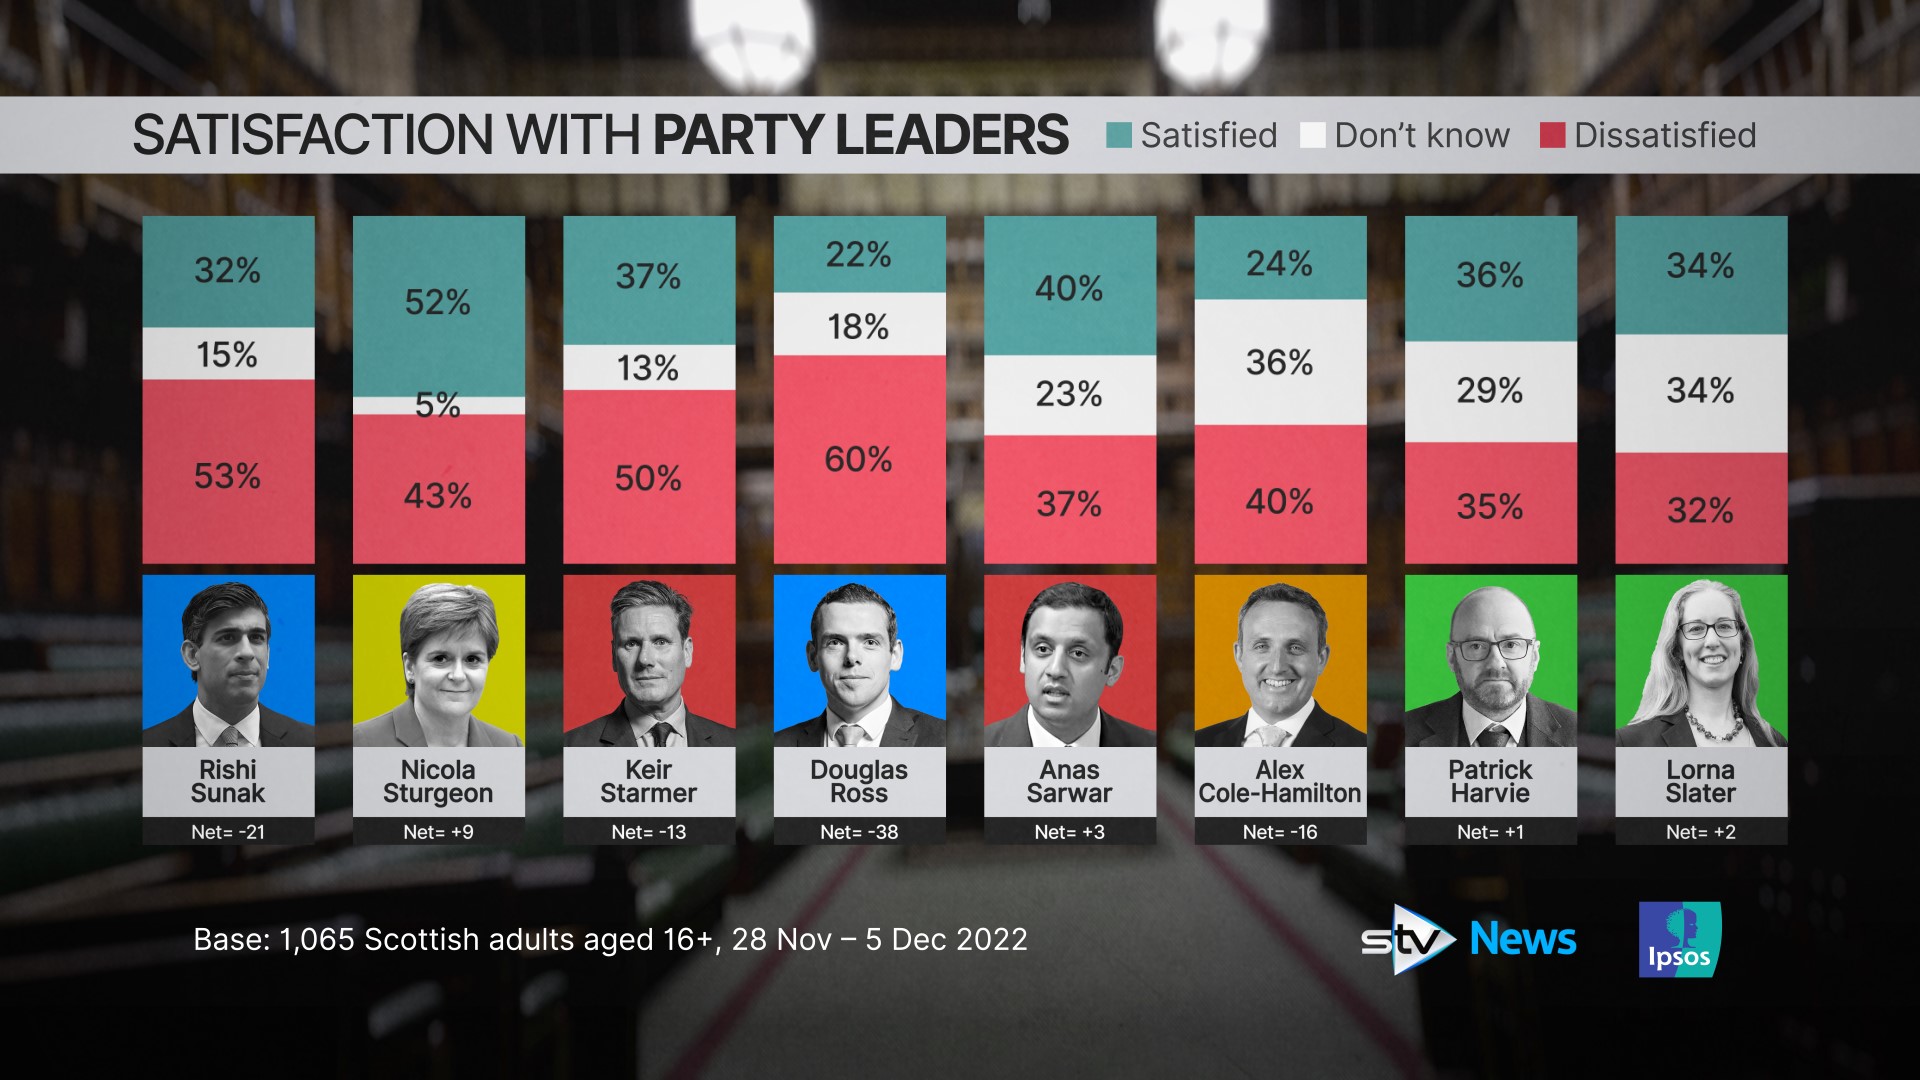 Nicola Sturgeon remains the most popular party leader.